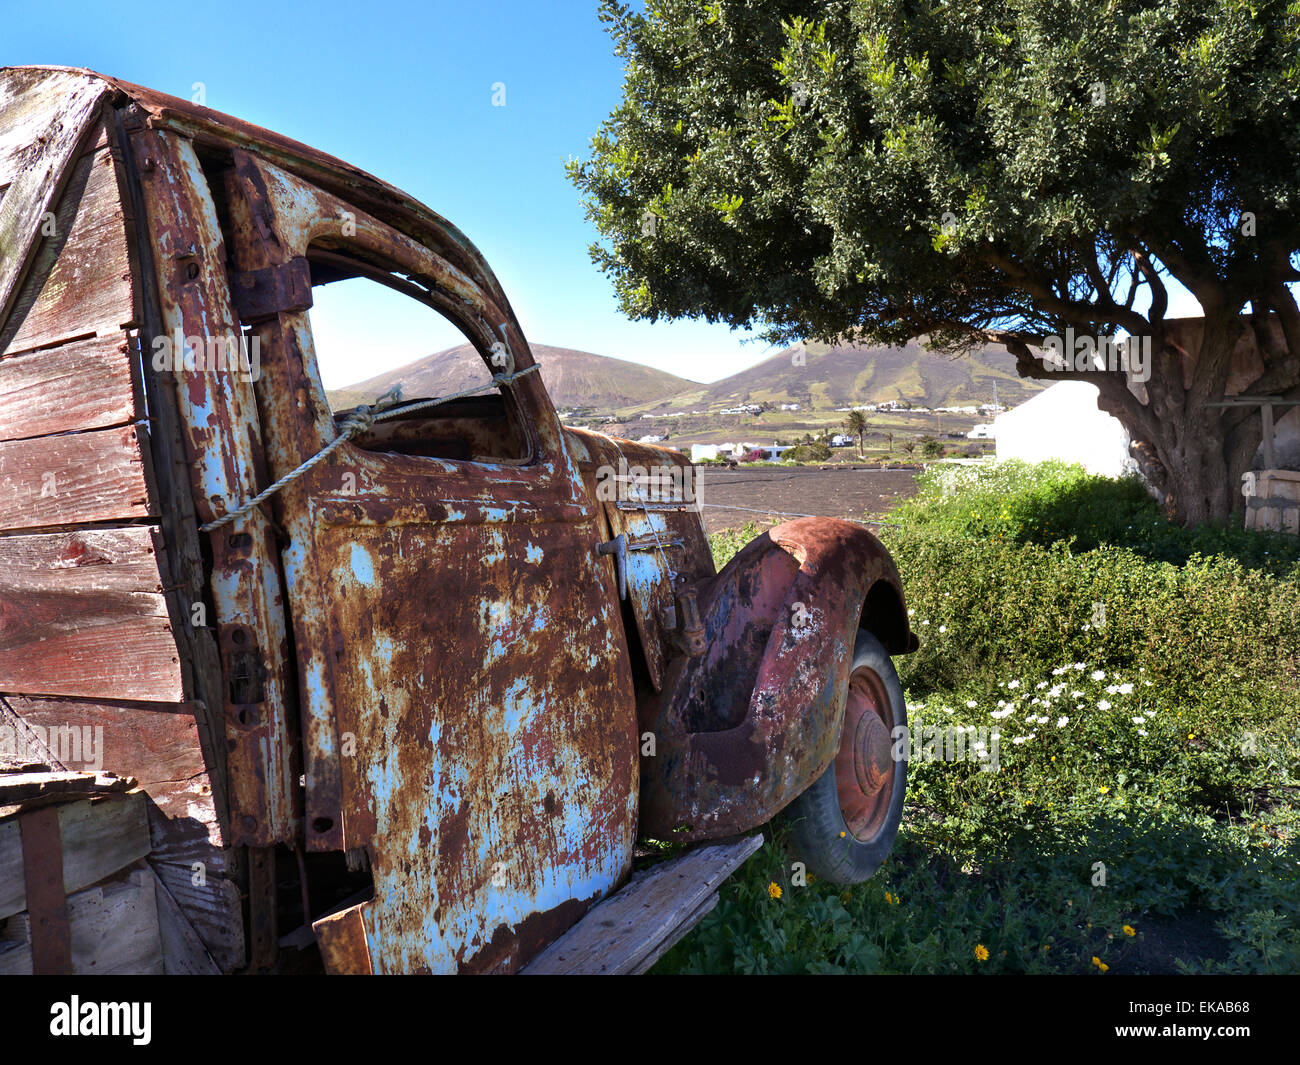 Rusting old pick up truck forms an attractive garden feature in a Lanzarote garden Canary Islands Spain Stock Photo